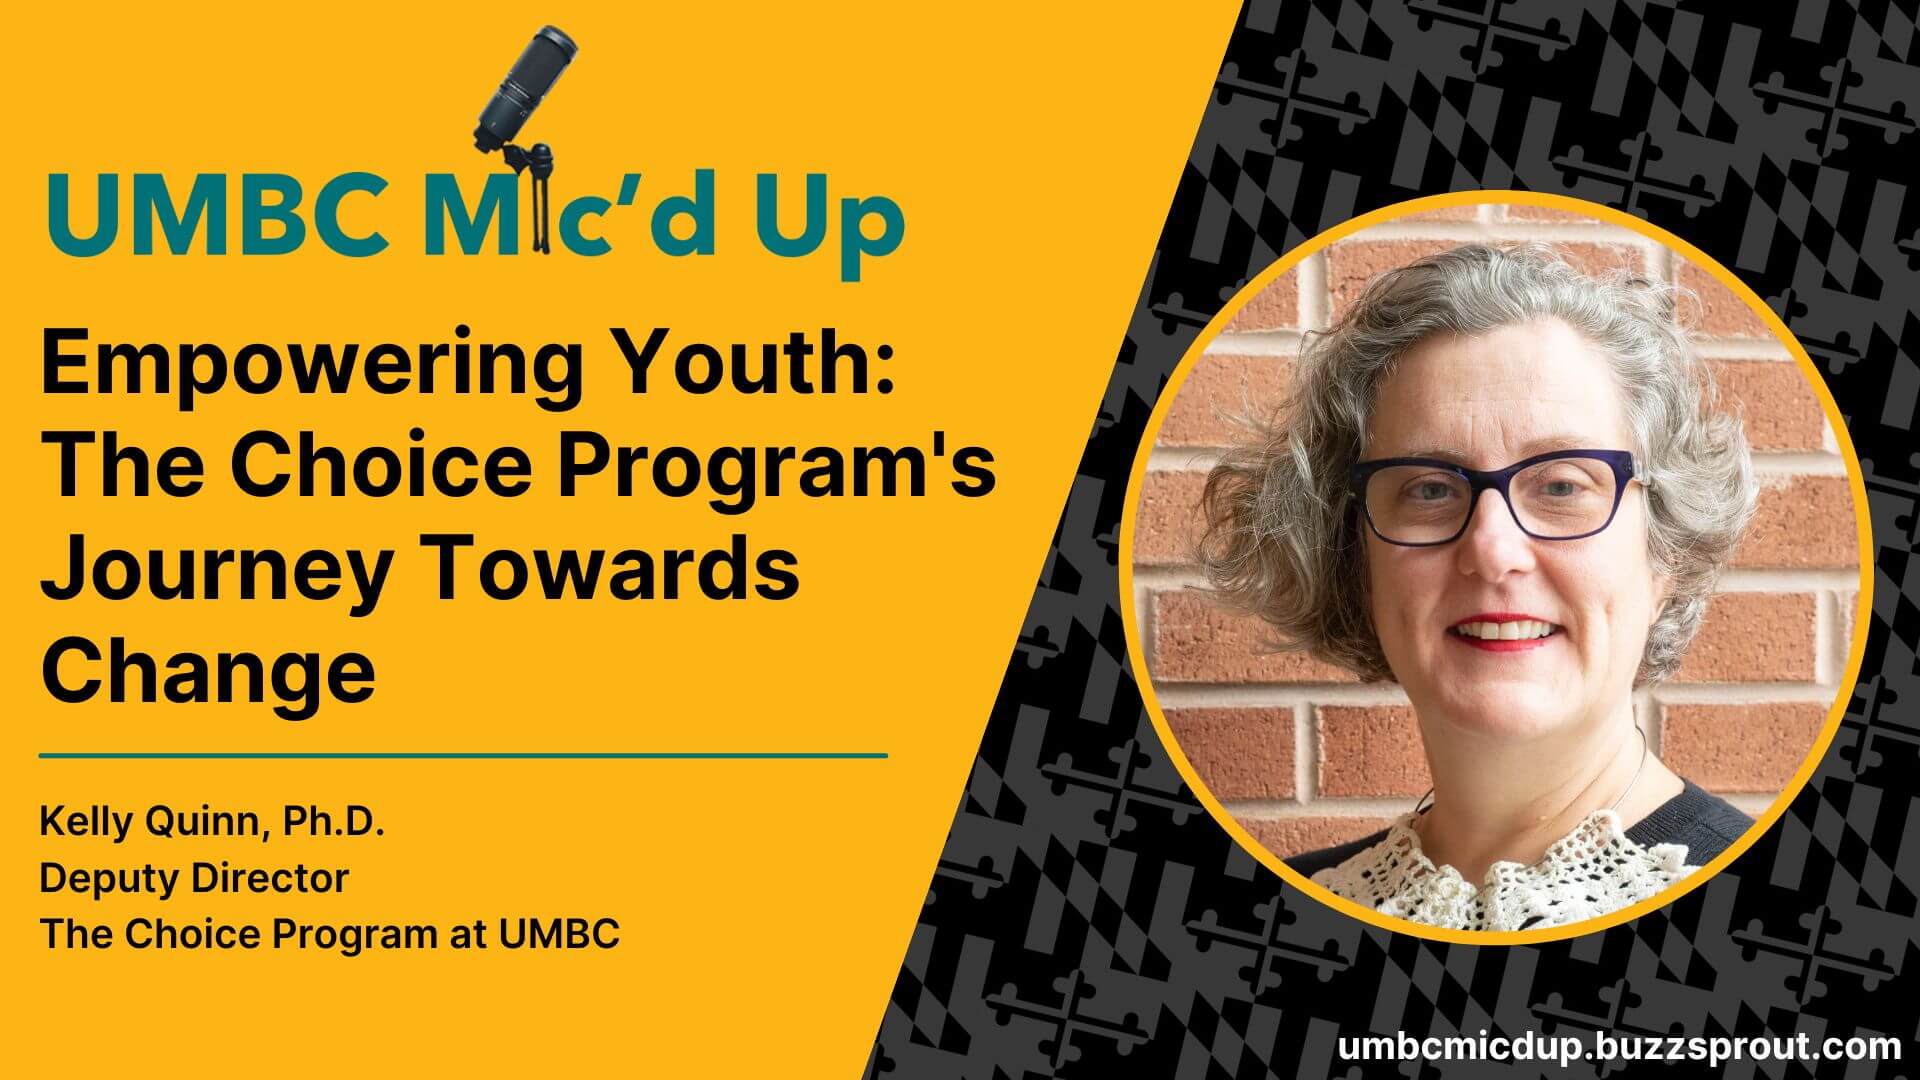 The Choice Program at UMBC is featured on the UMBC Mic'd Up Podcast